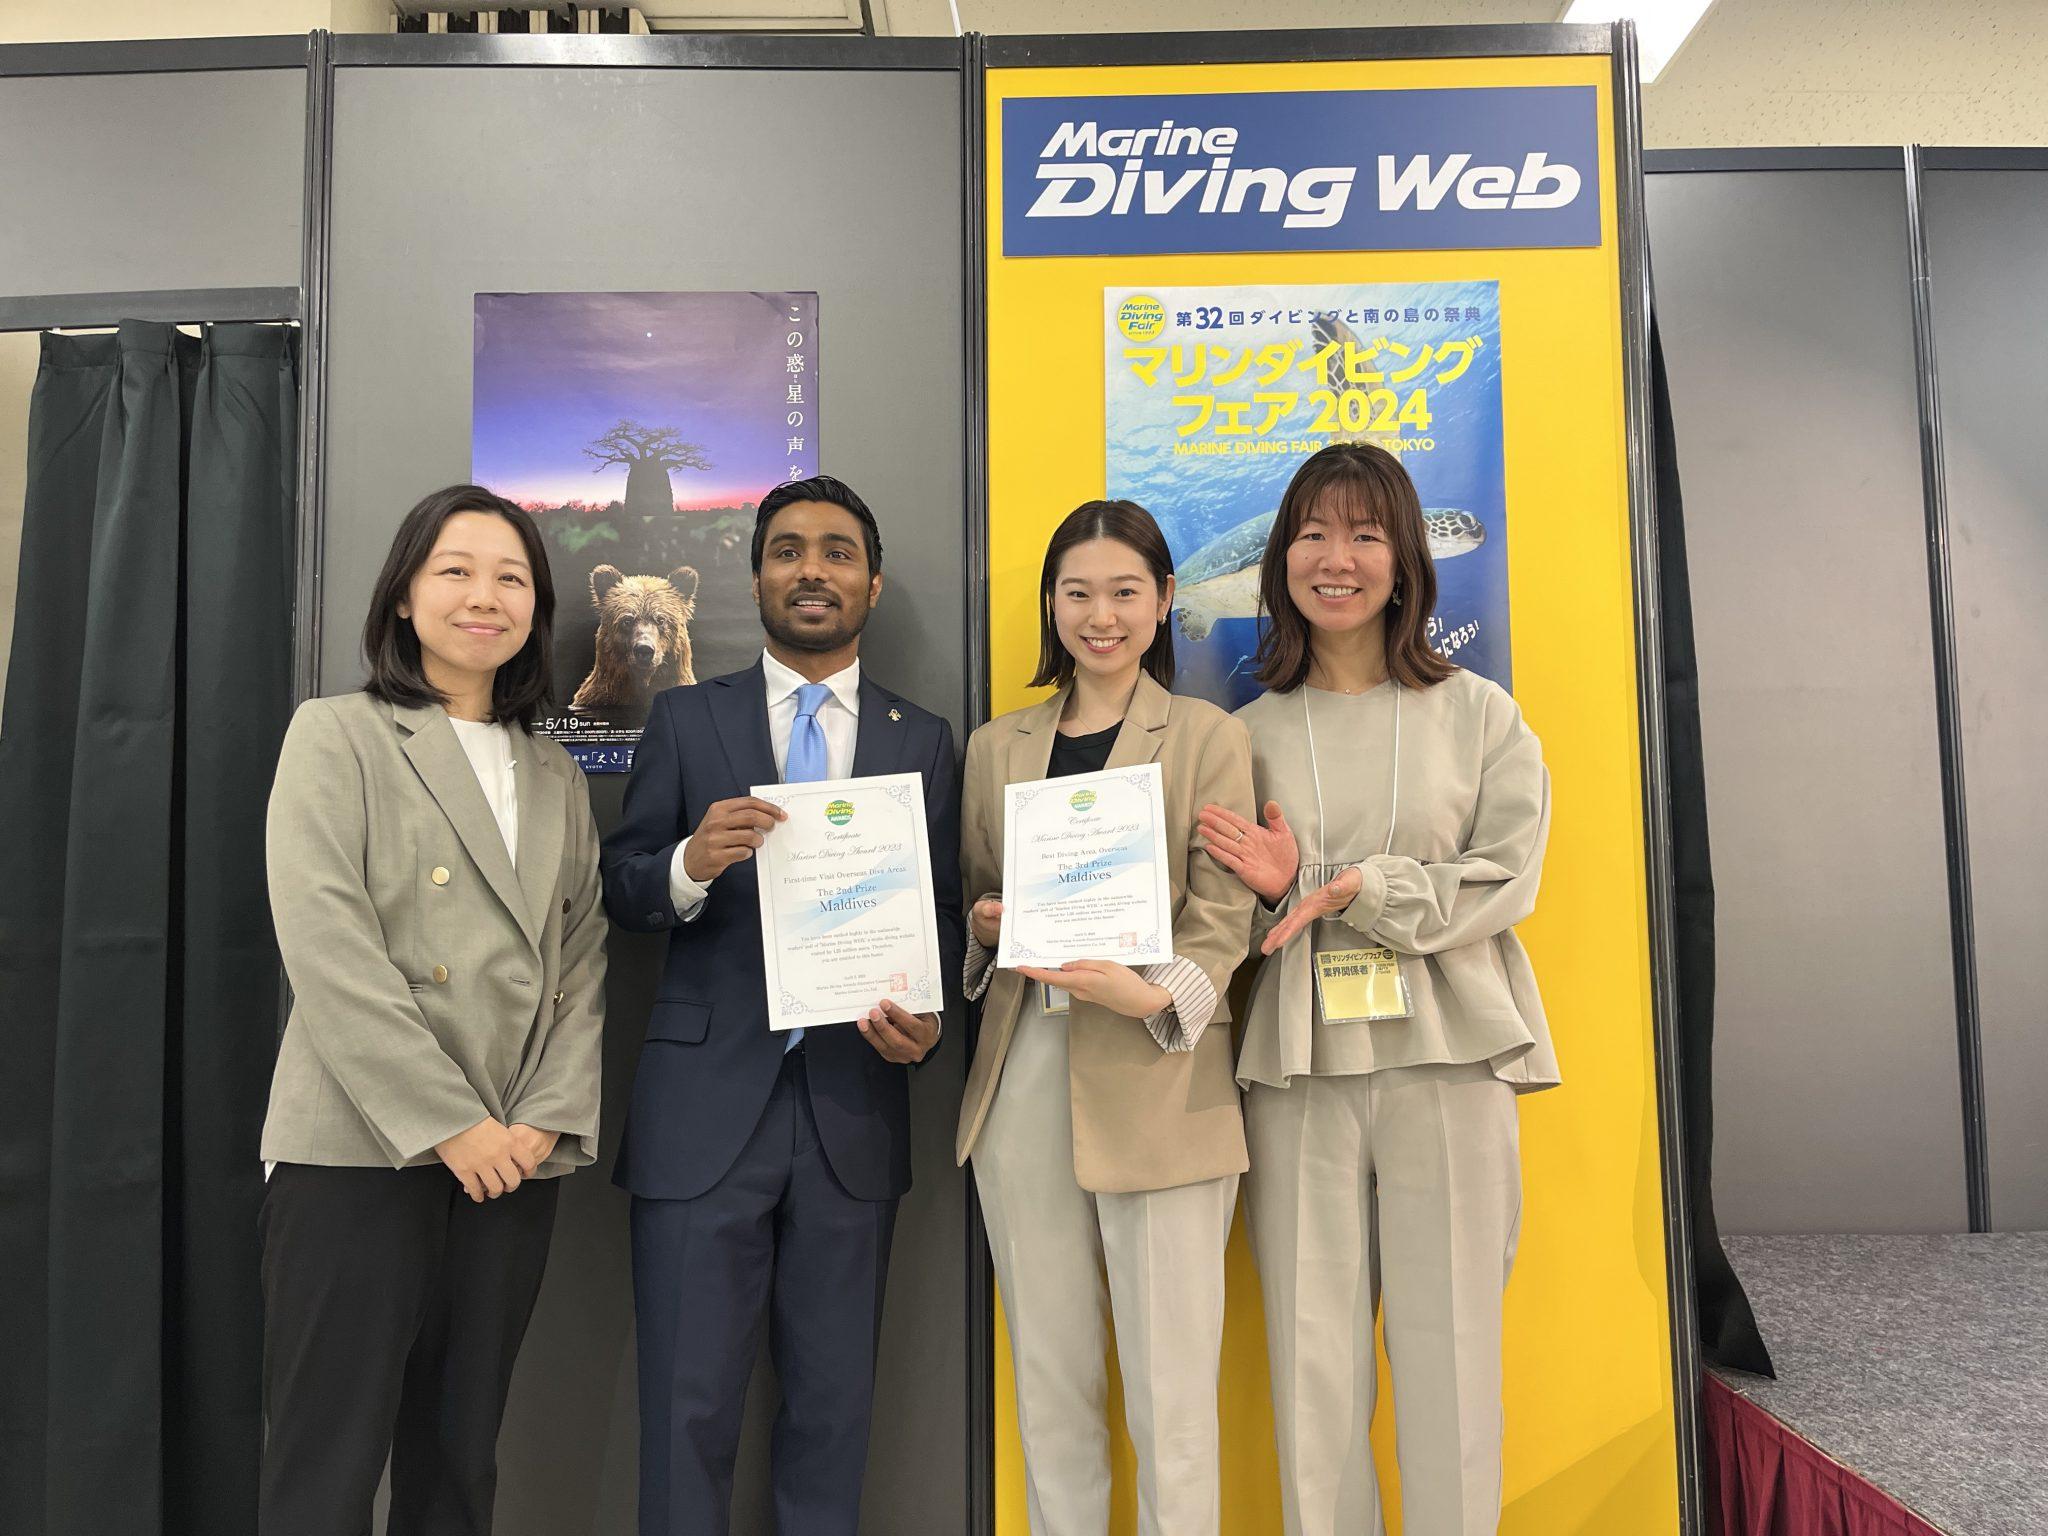 Maldives Wins in 2 Categories at the Marine Diving Awards in Japan